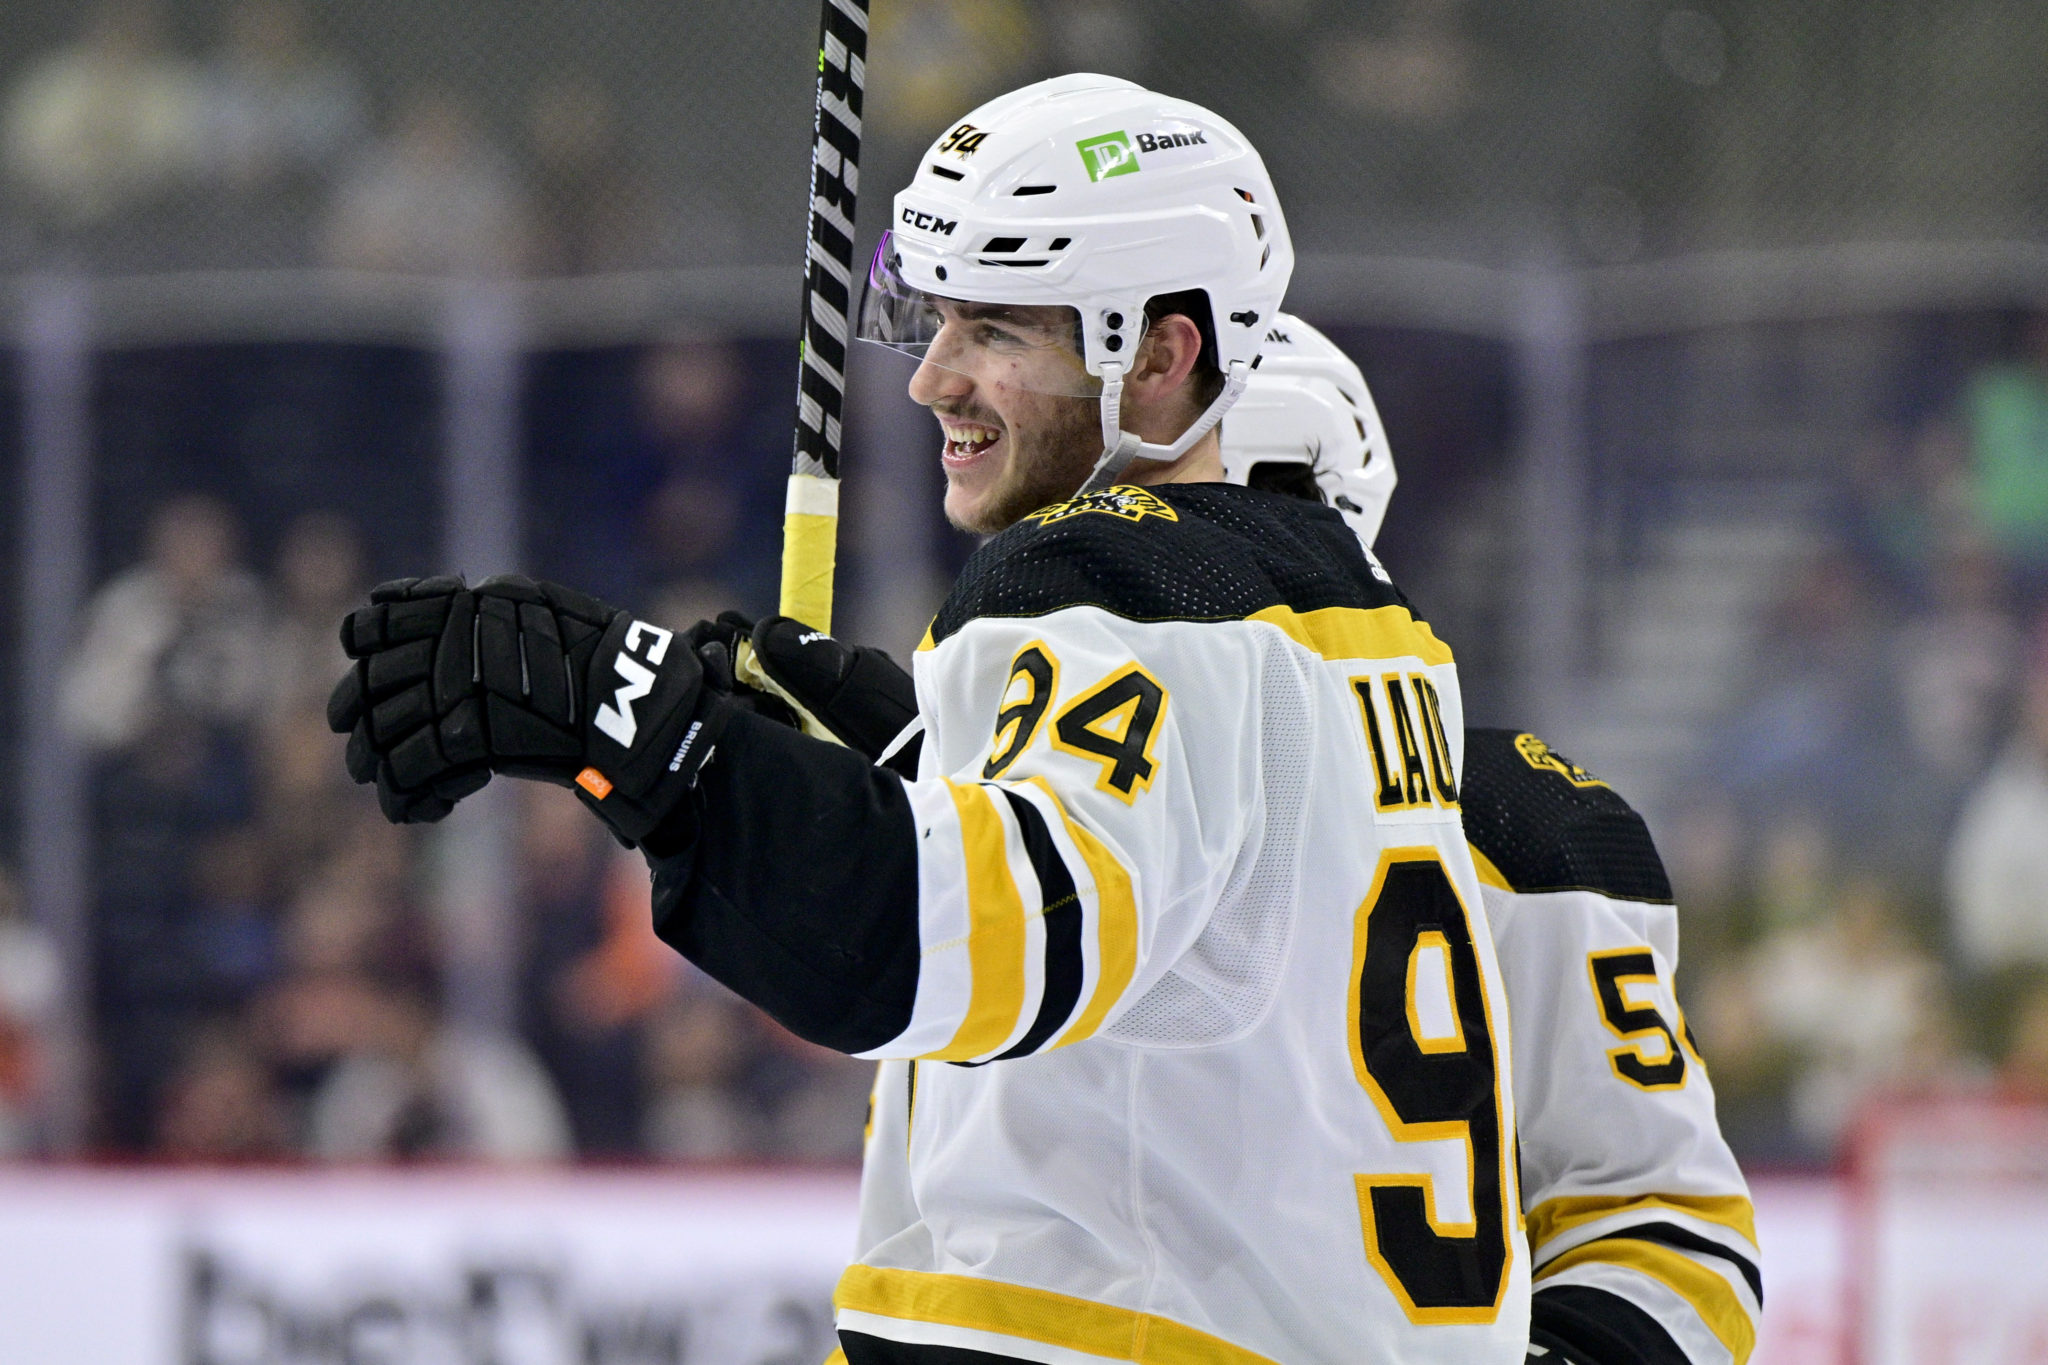 Bruins Camp Wrap: Steen and Lauko Bringing Physicality